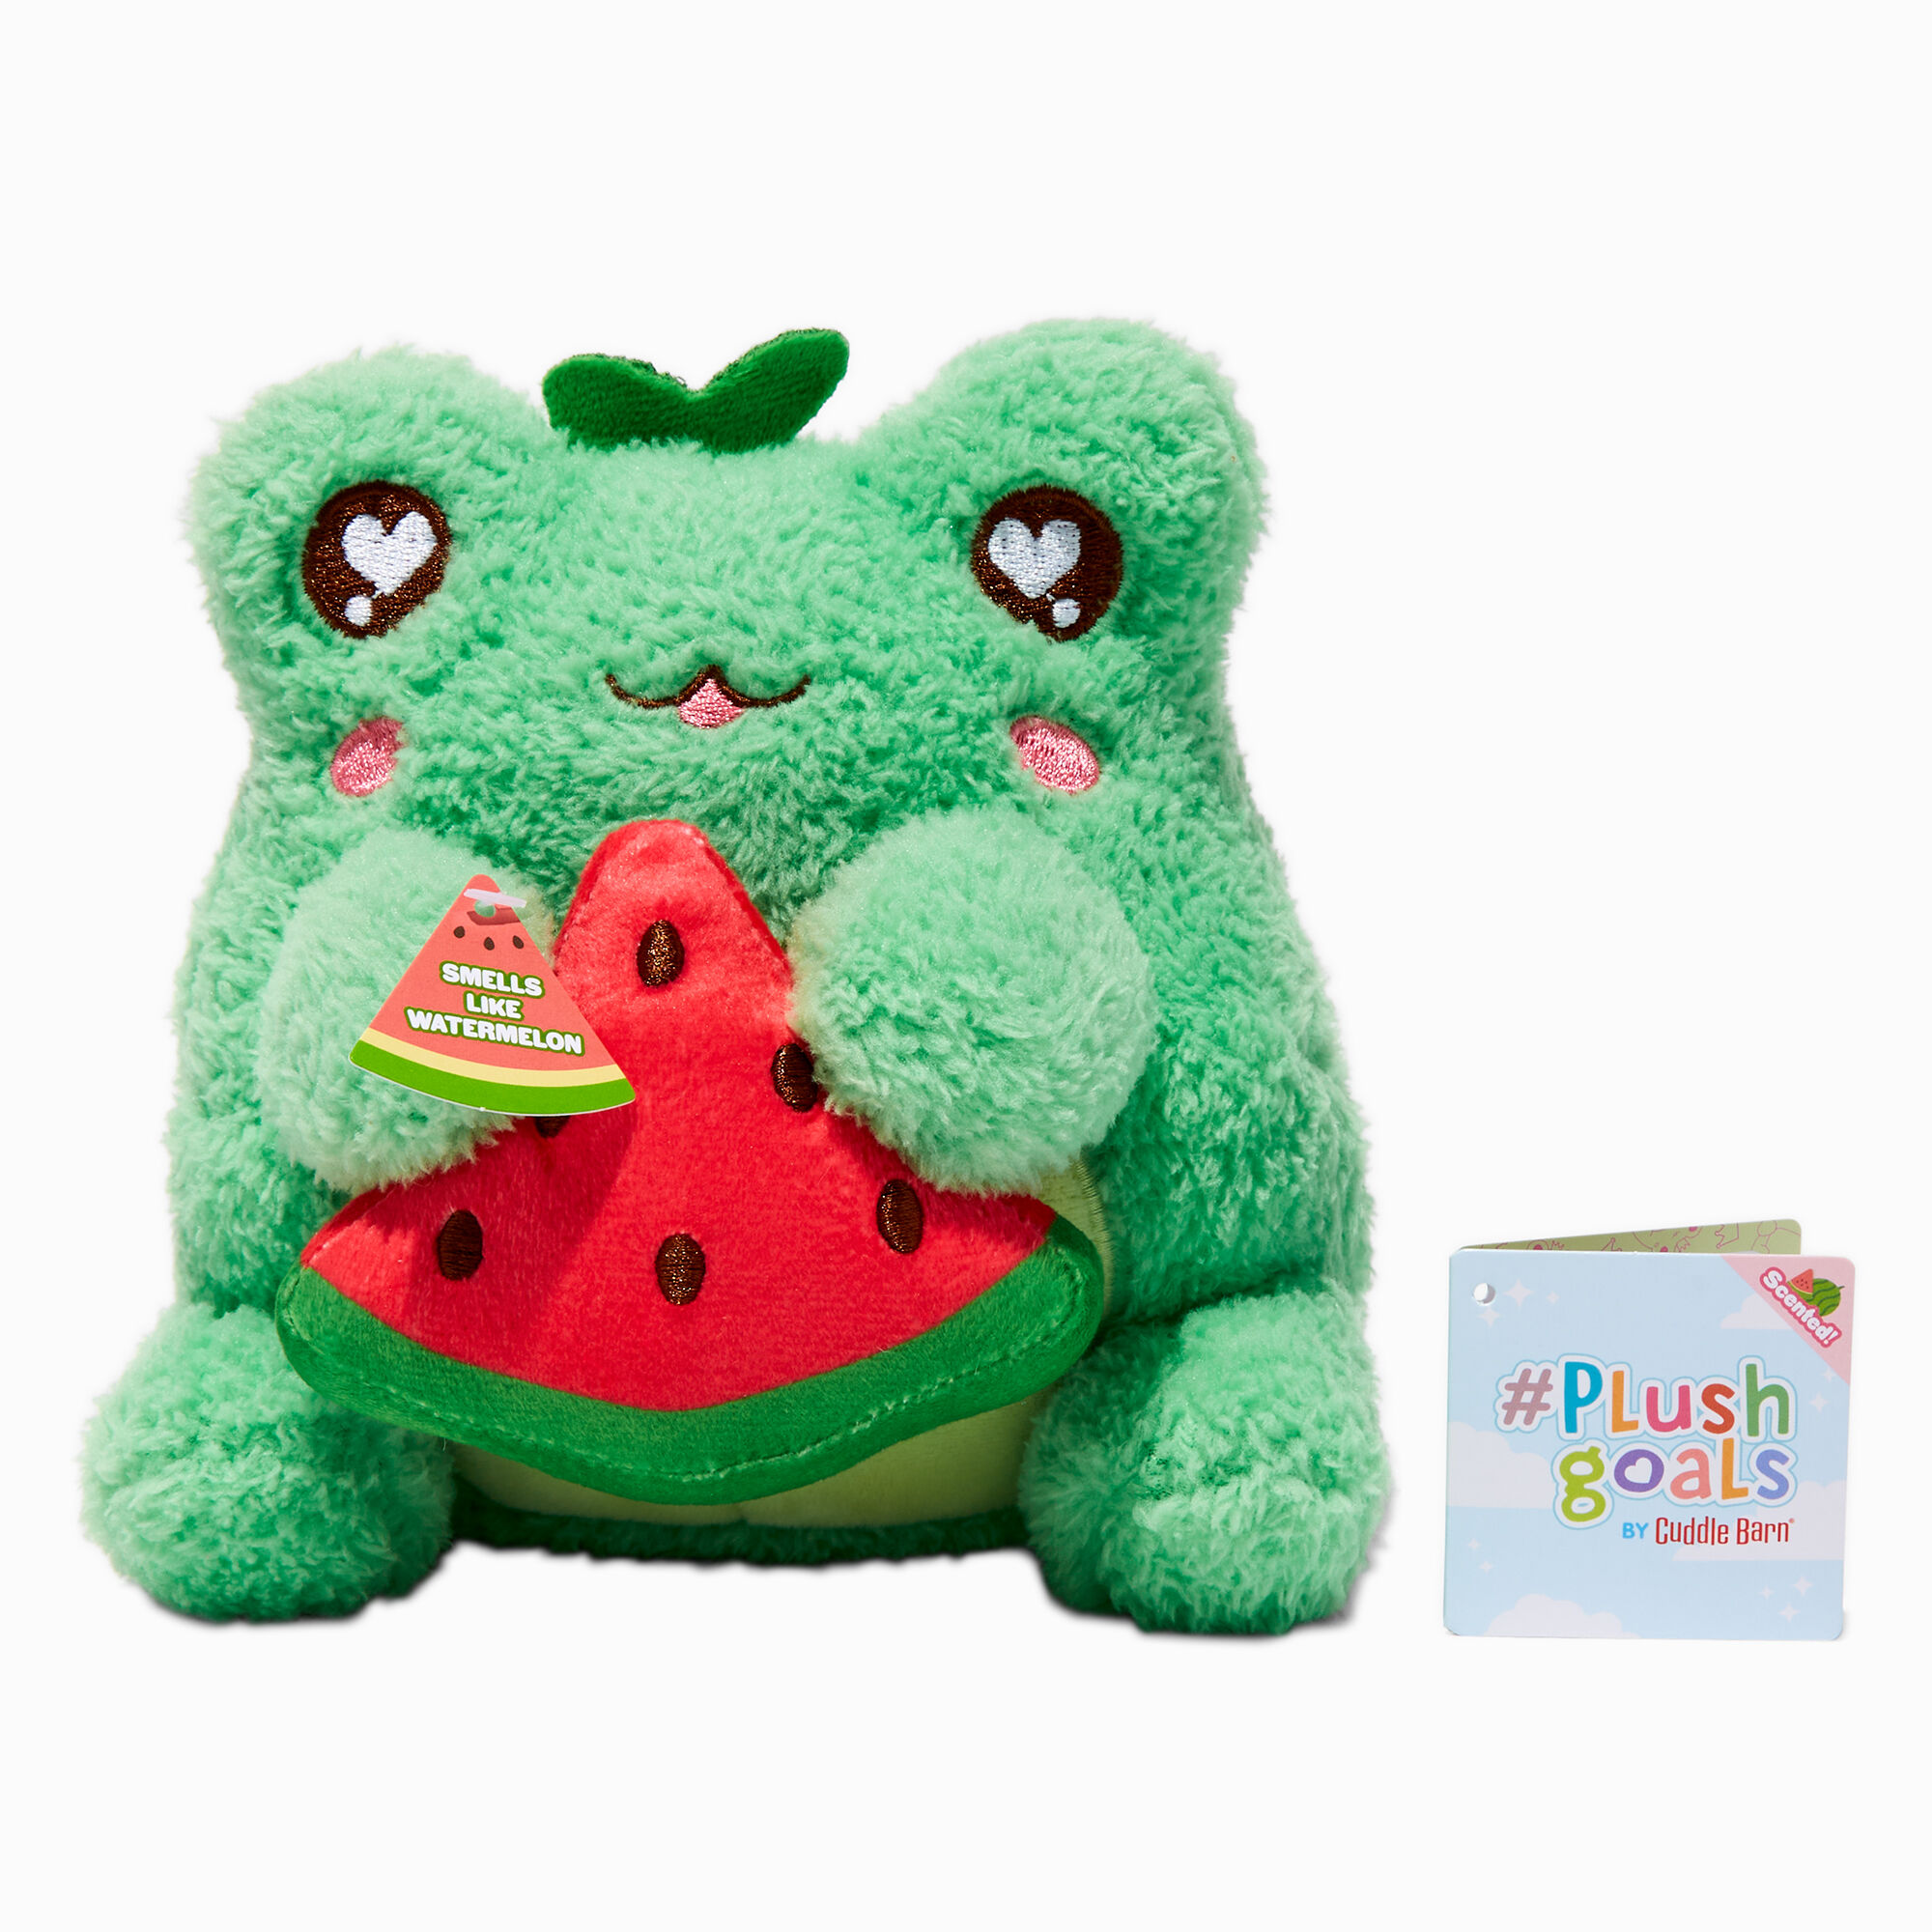 View Claires plush Goals By Cuddle Barn 6 Watermelon Wawa Soft Toy information